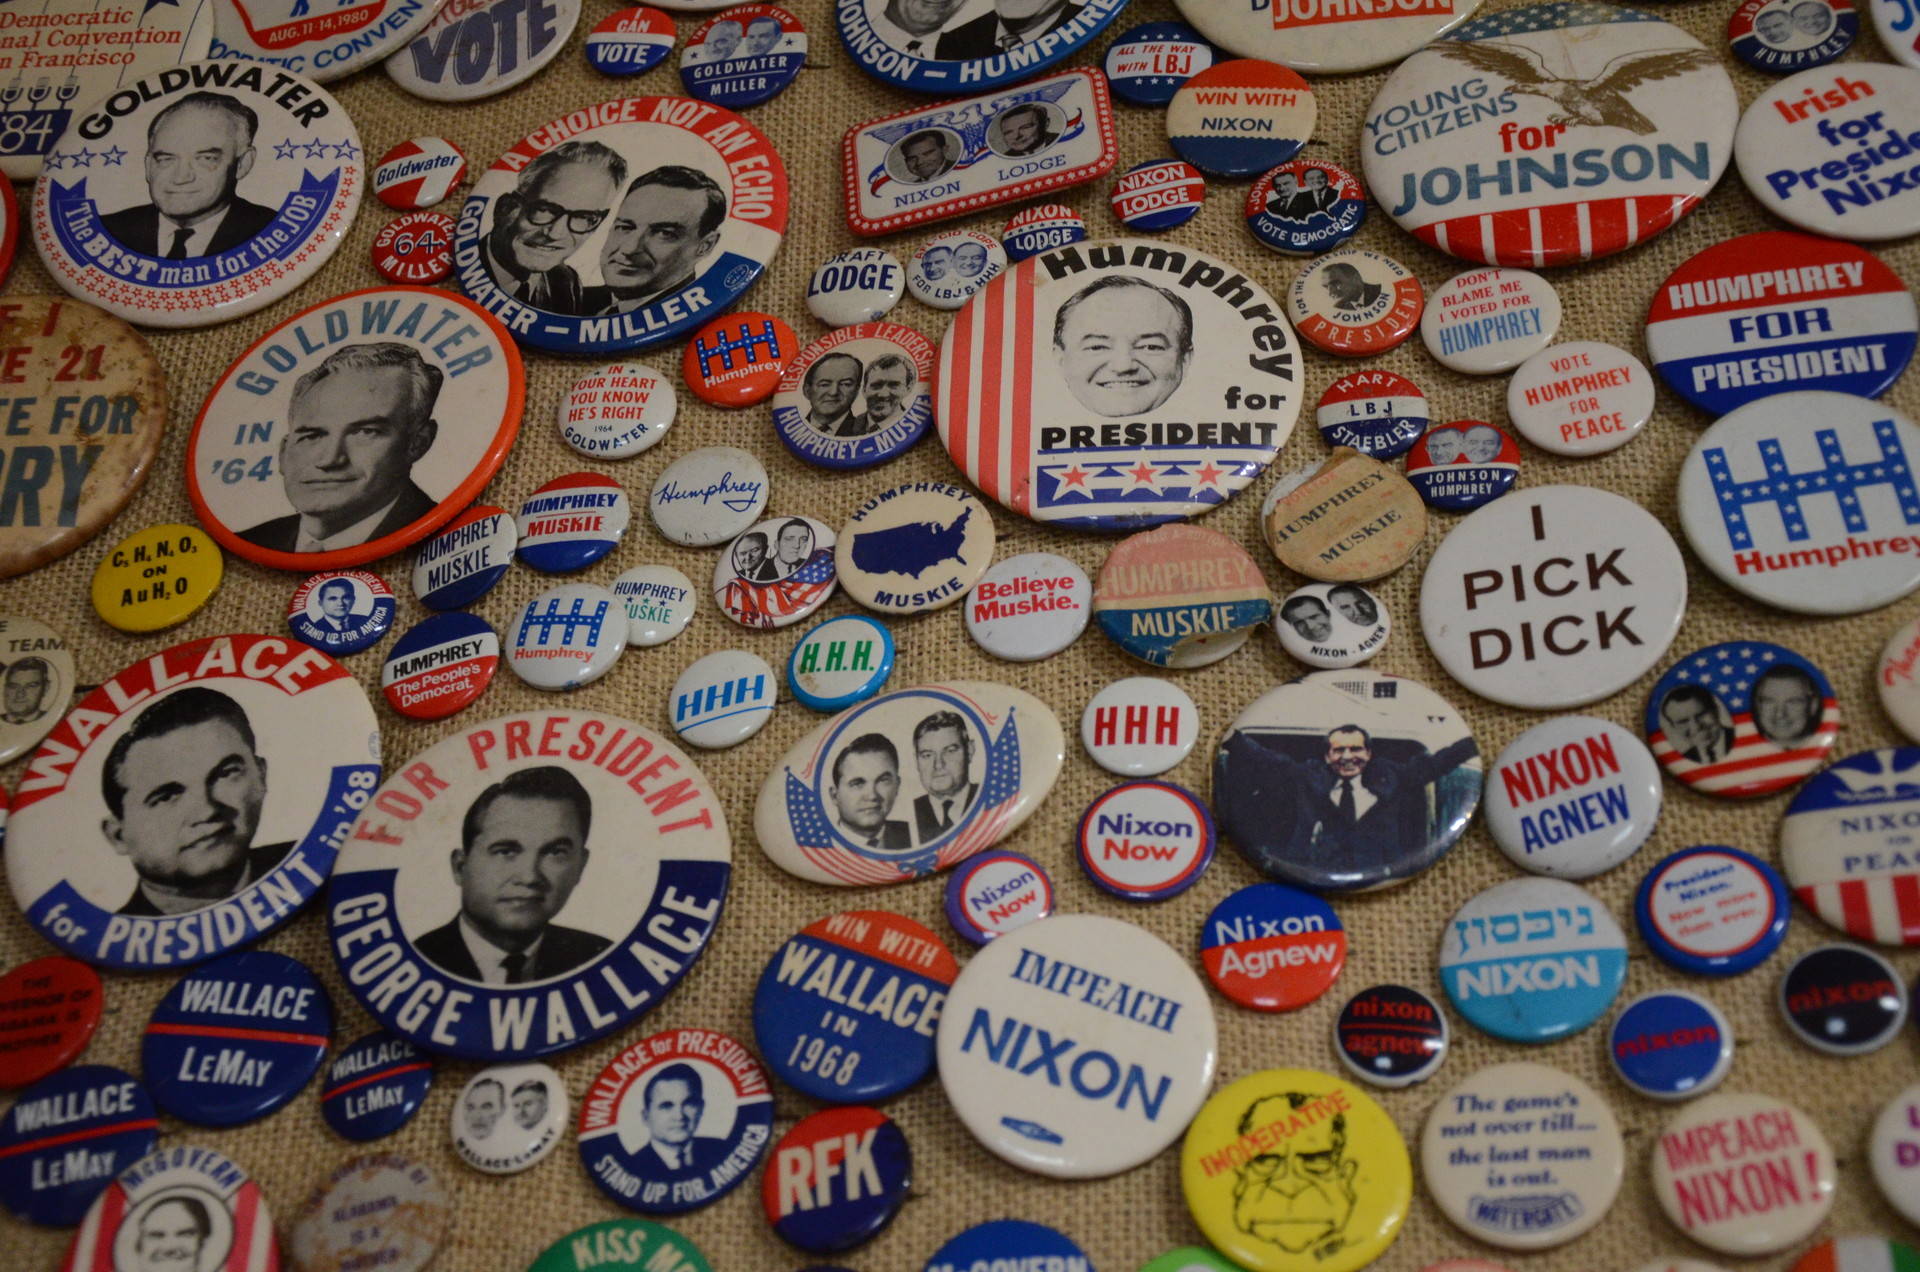 Alan Rosenzweig started collecting buttons when he was 12 years old. His collection now totals more than 240,000. Ryan Levi/KQED